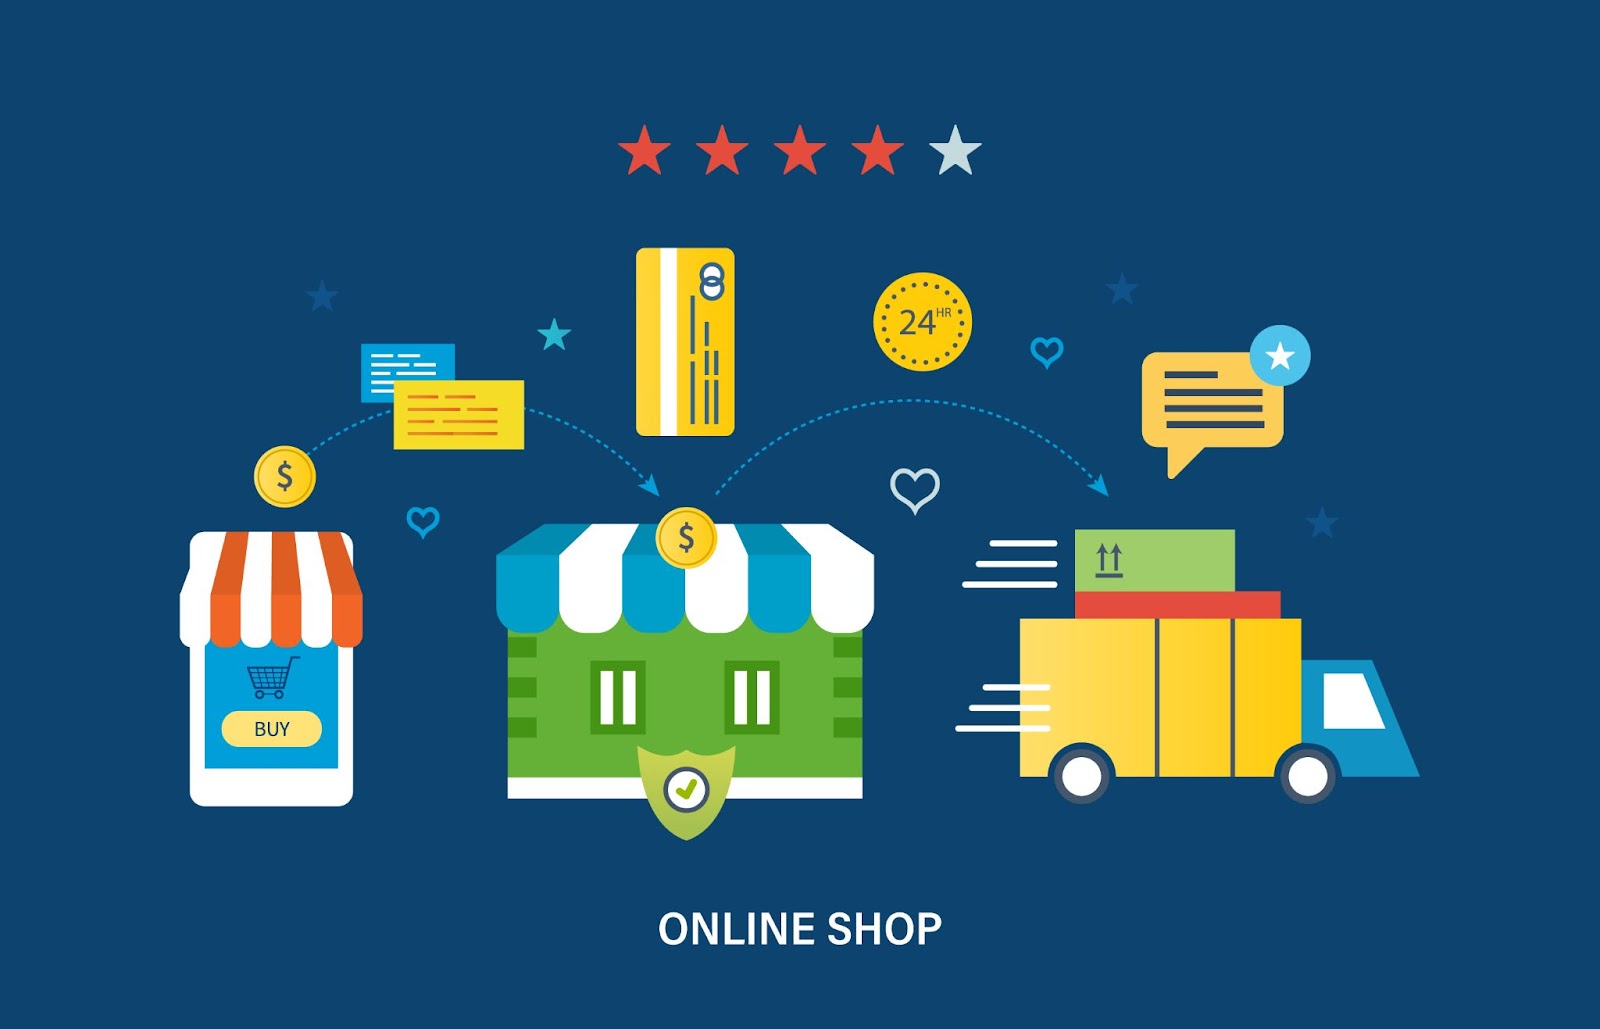 How do ecommerce platforms  sell products: the basic workflow